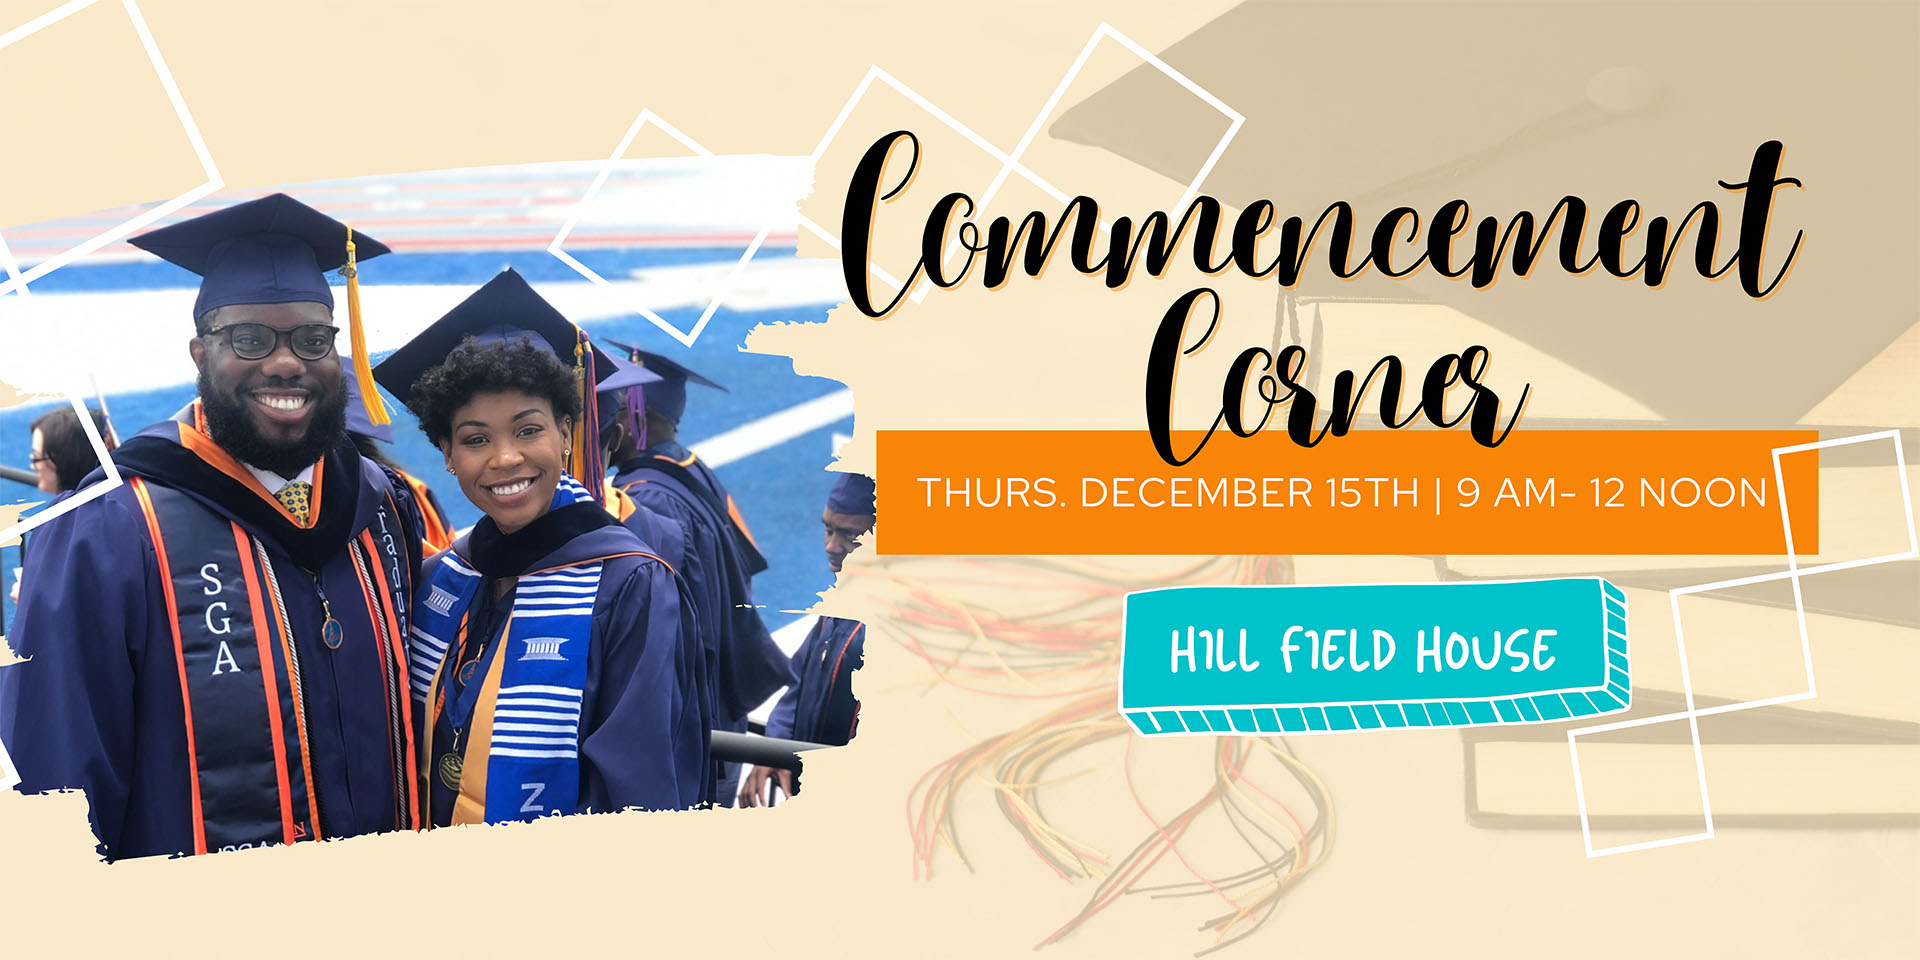 Commencement Corner event for December 15 from 9am to 12pm